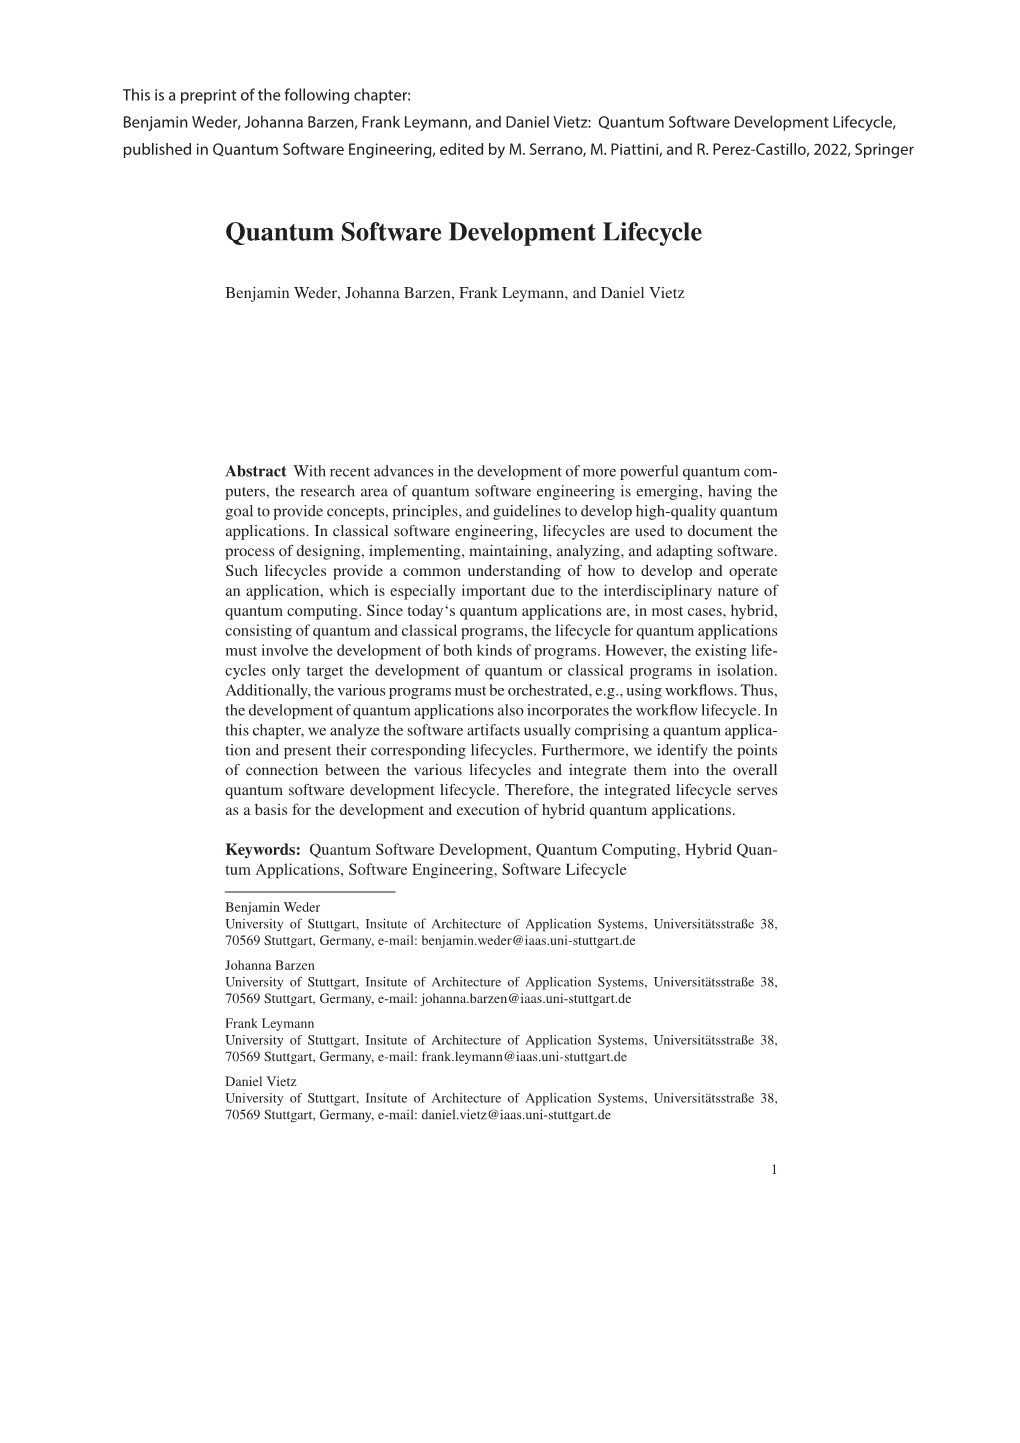 Quantum Software Development Lifecycle, Published in Quantum Software Engineering, Edited by M